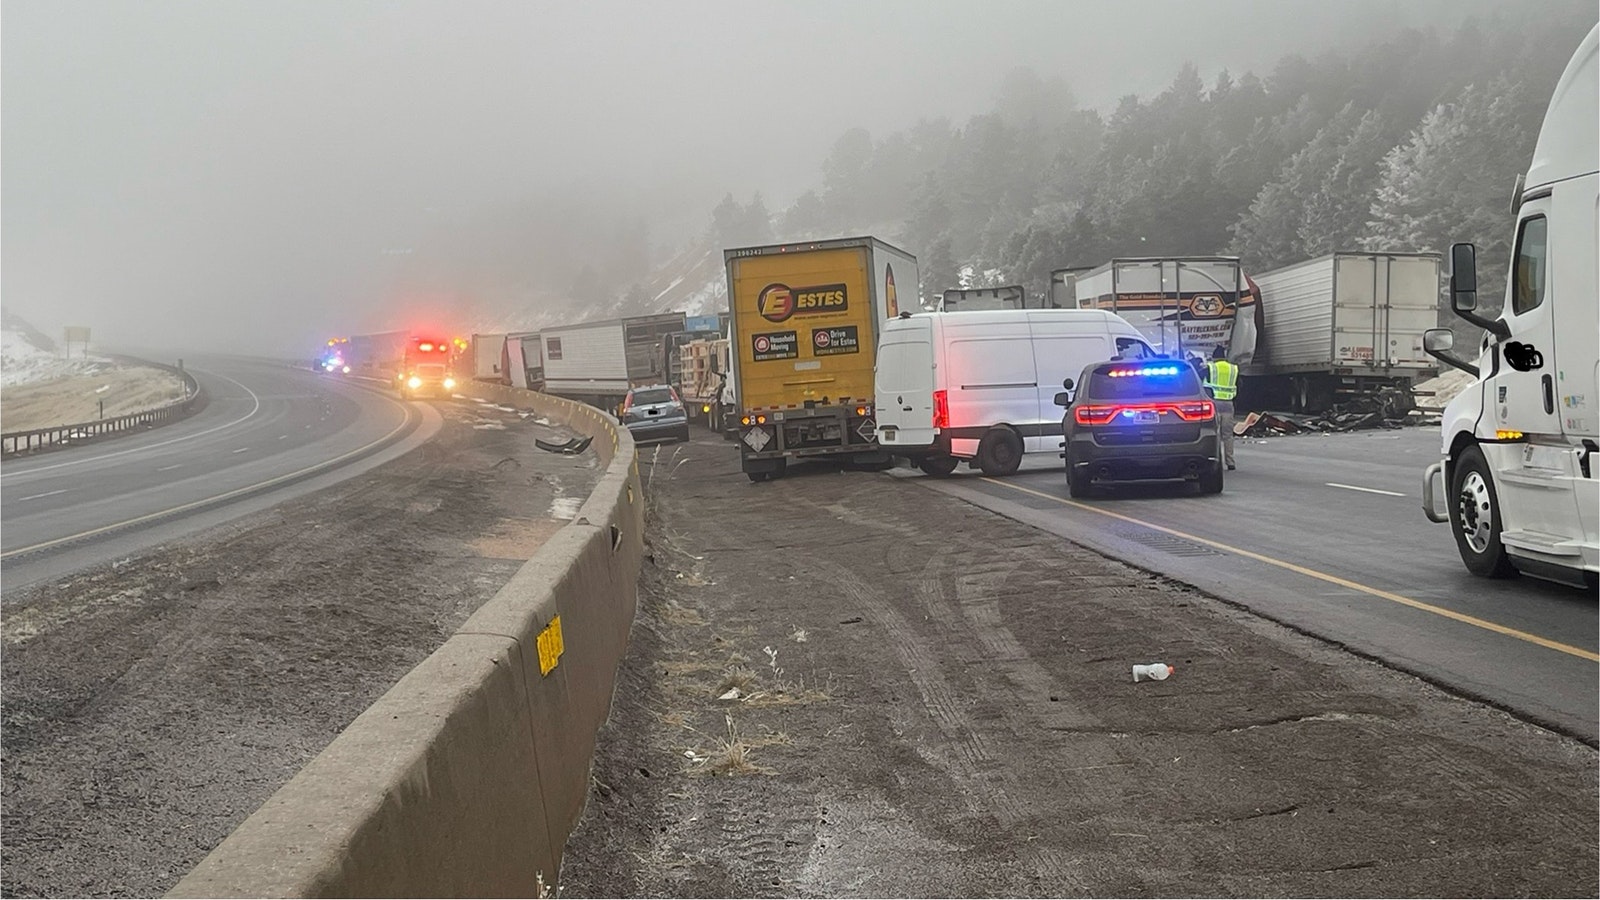 Traffic was at a standstill Thursday in the first hours of a major snowstorm that caused several crashes around the state and closed Interstate 80 for a time because of this one.